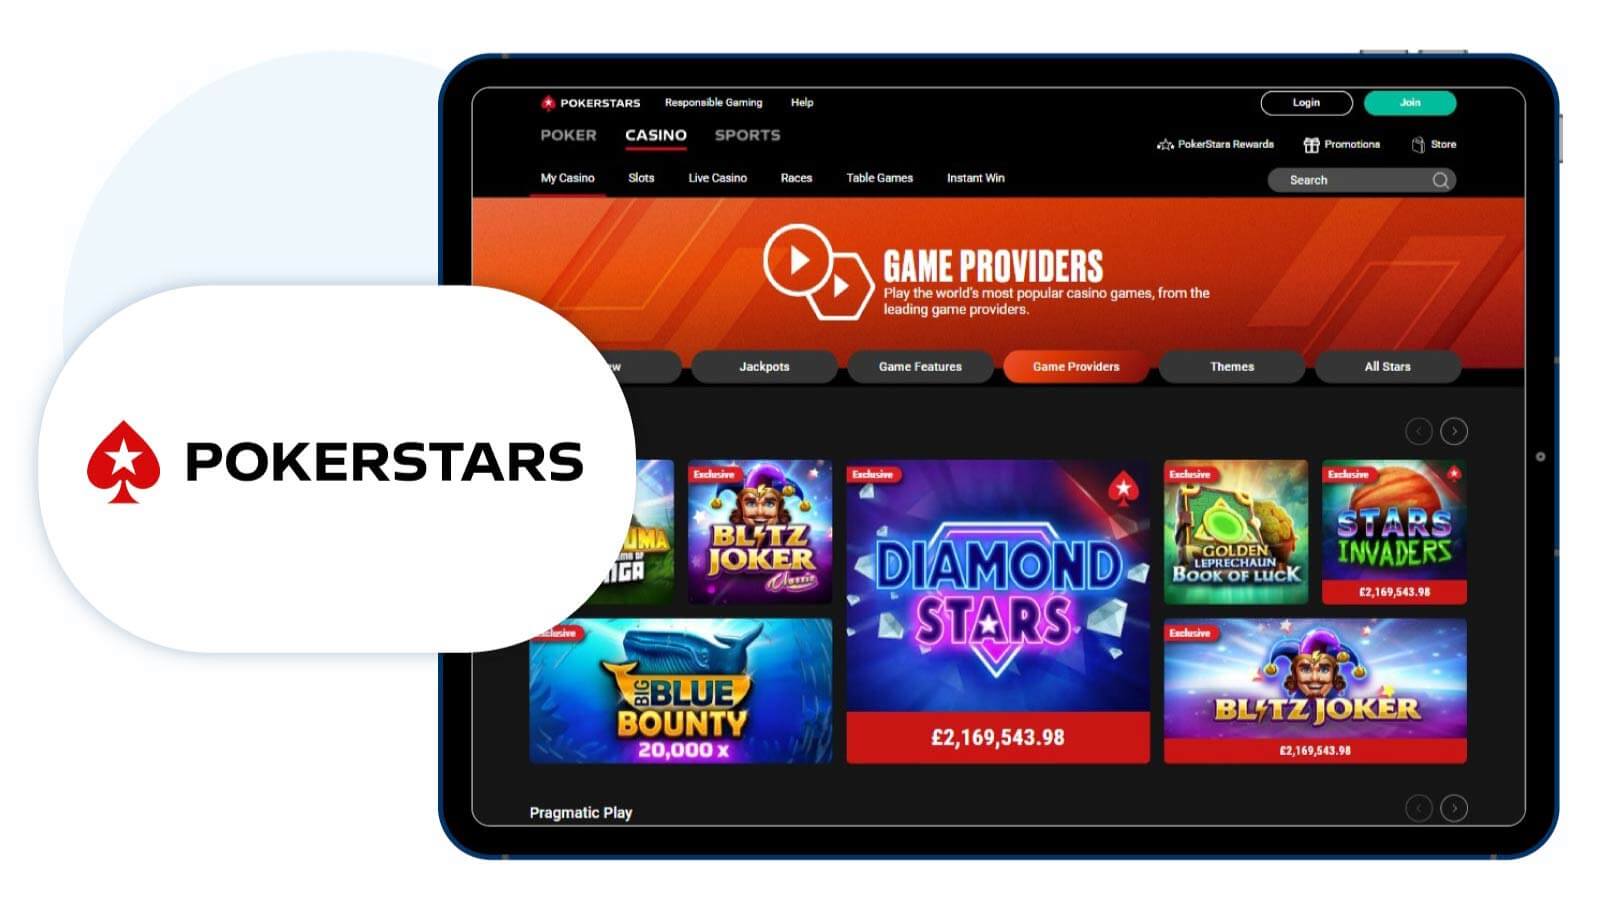 Pokerstars-Deposit-via-Neosurf-and-Experience-Low-Wagering-Requirements 